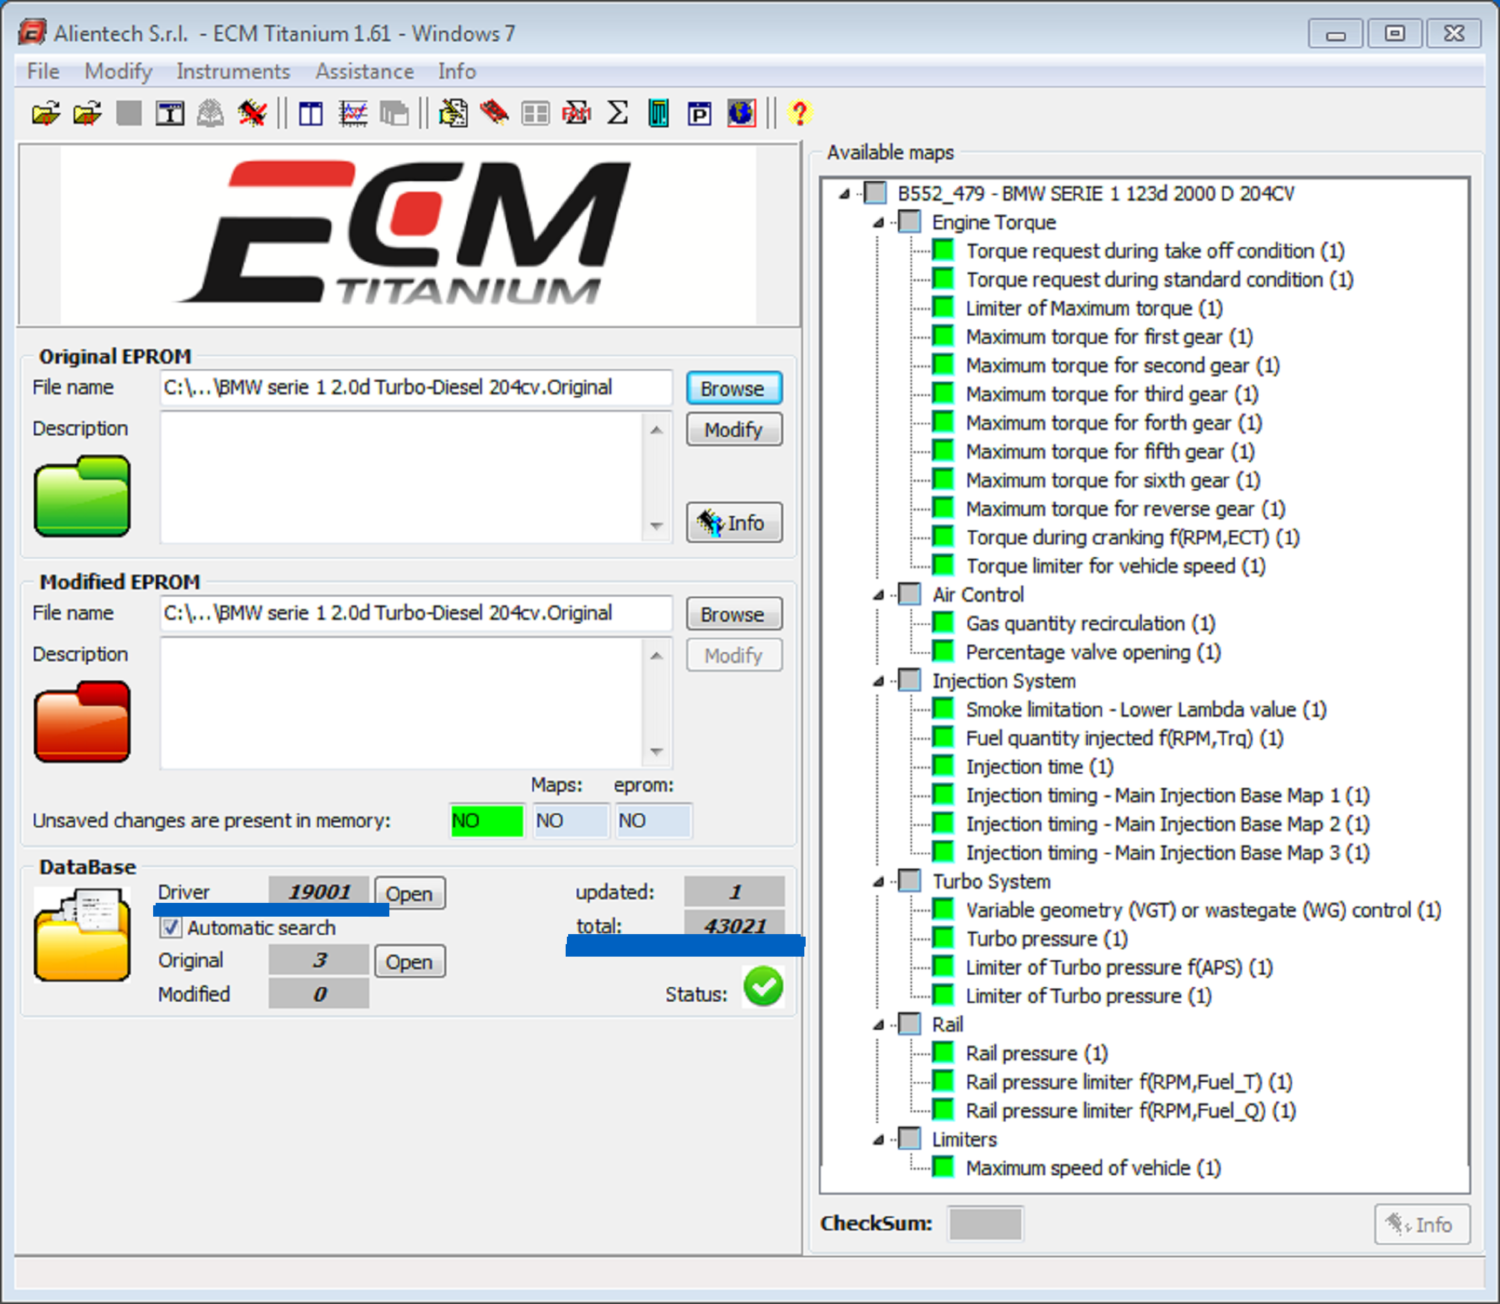 new ecm titanium+26100 drivers tuning software for kess/ktag/mpps/galletto